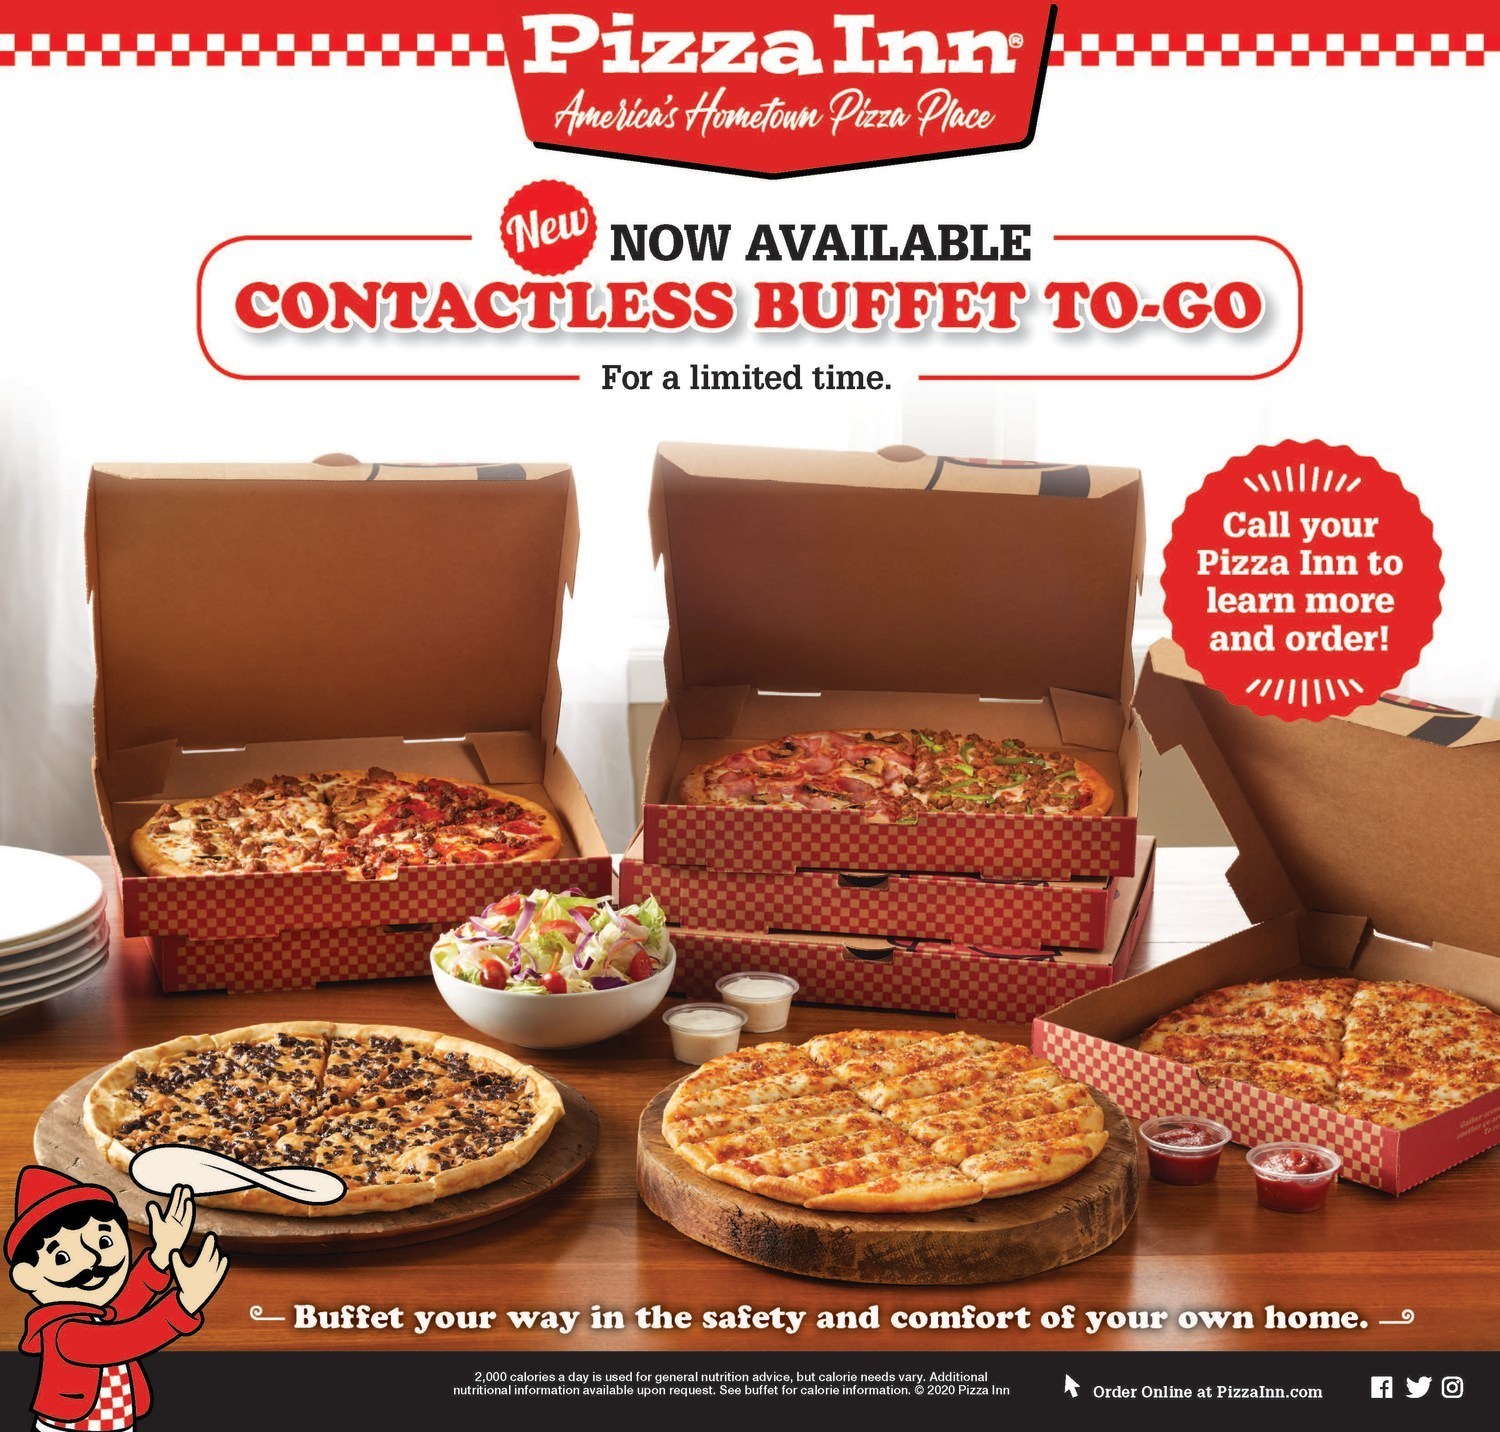 Pizza Inn Launches New Contactless Buffet To Go for Carryout and Delivery -  Mar 25, 2020